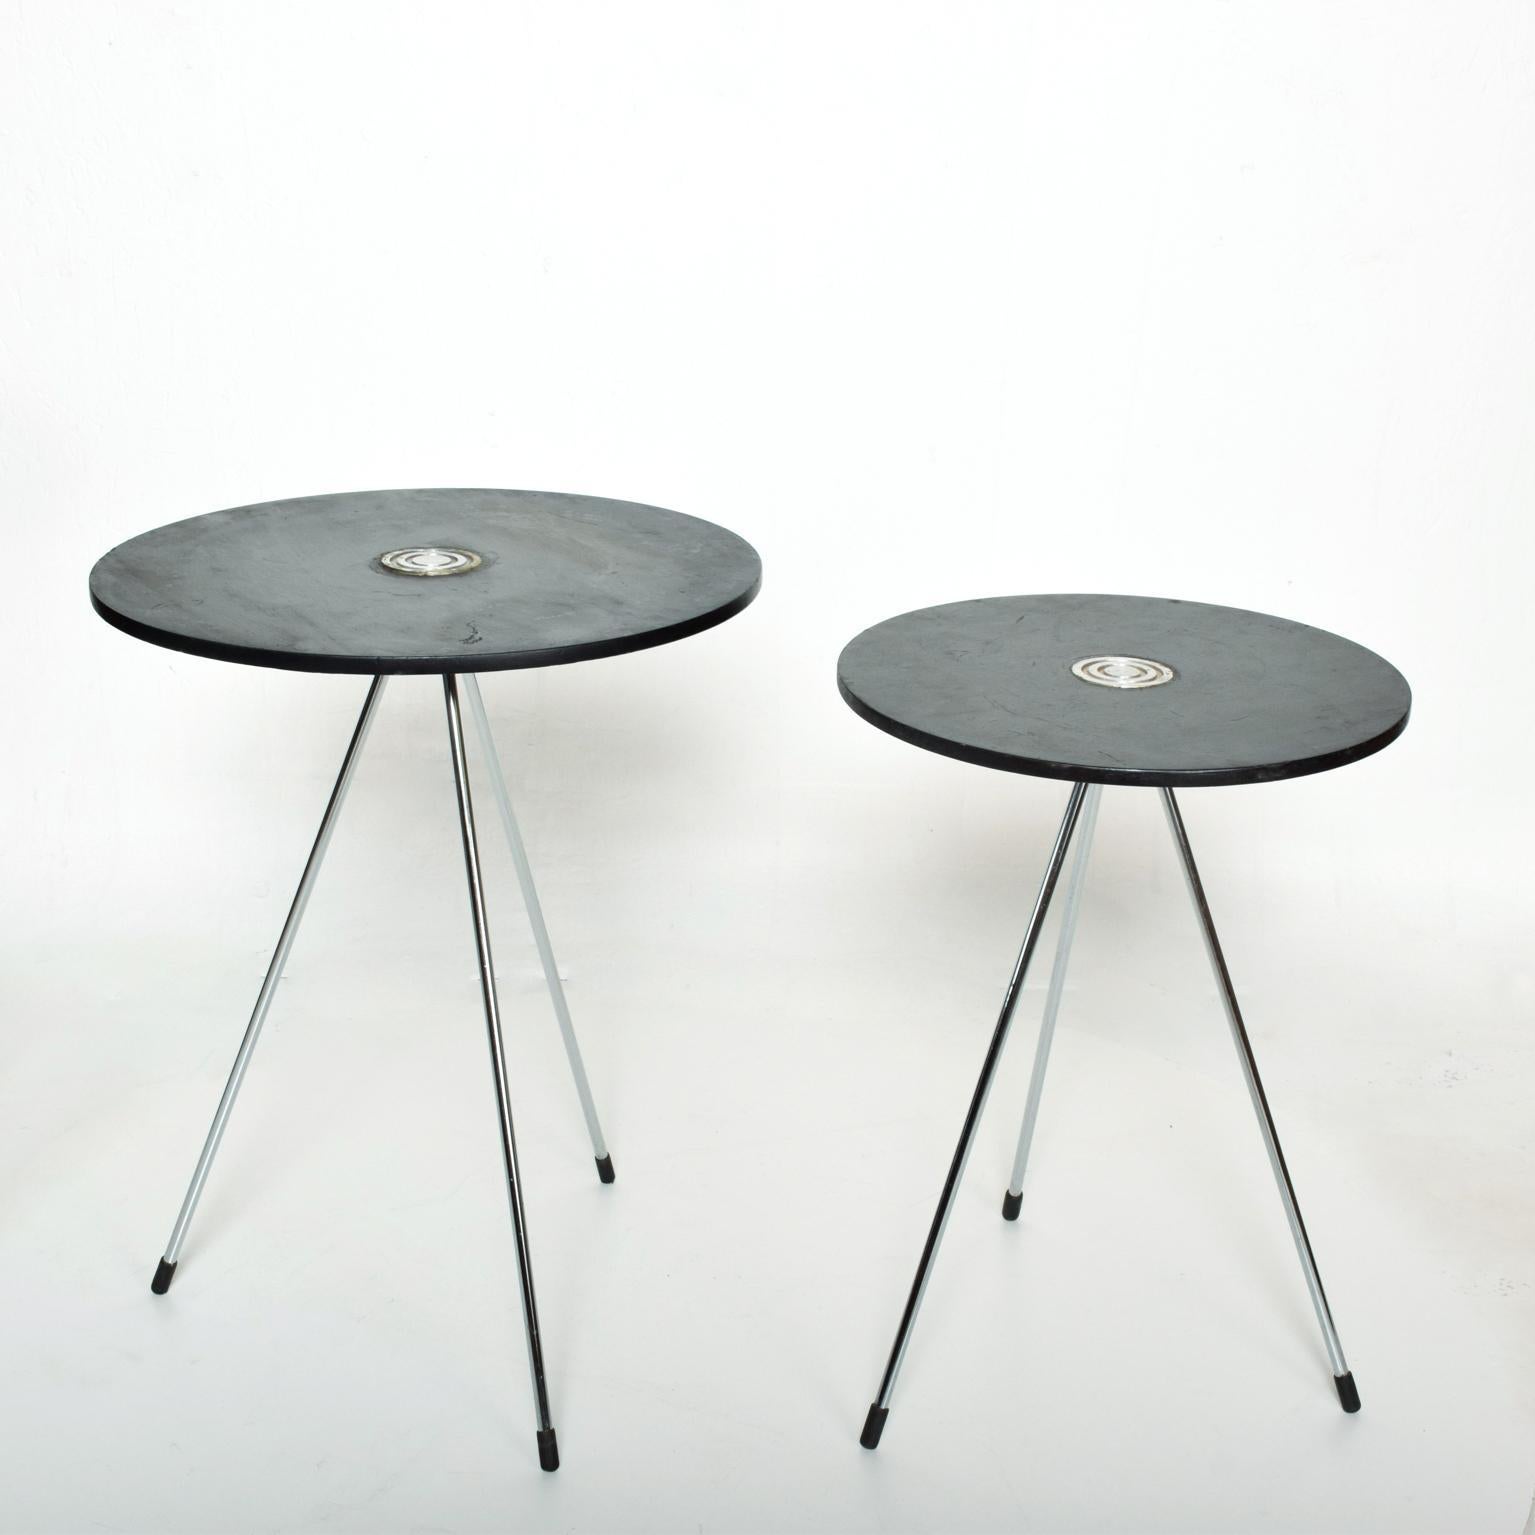 Wood Mid-Century Modern Mexican Round Nesting Tables in Black